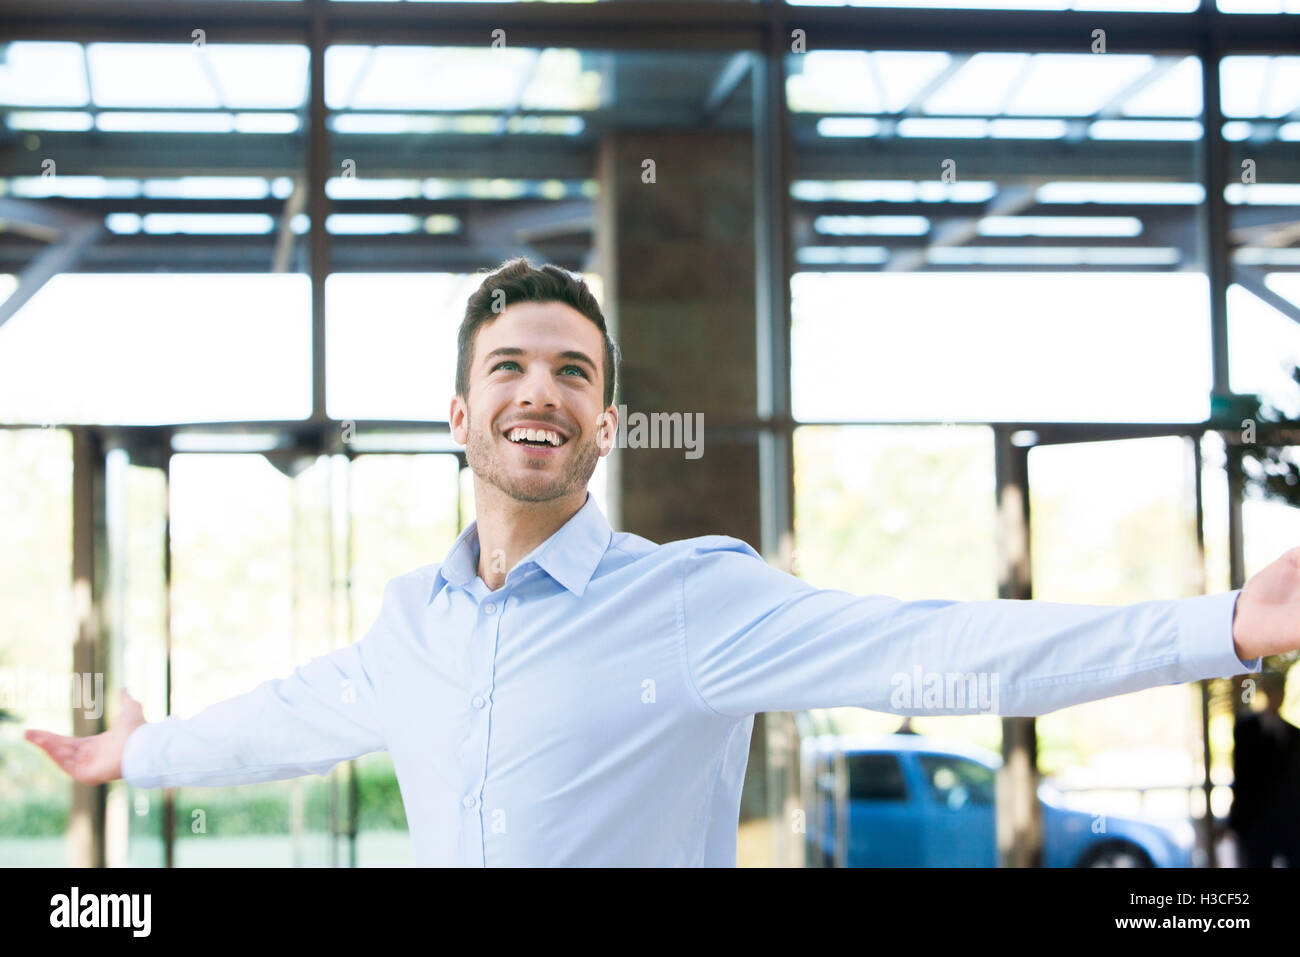 Man with outstretched arms Stock Photo